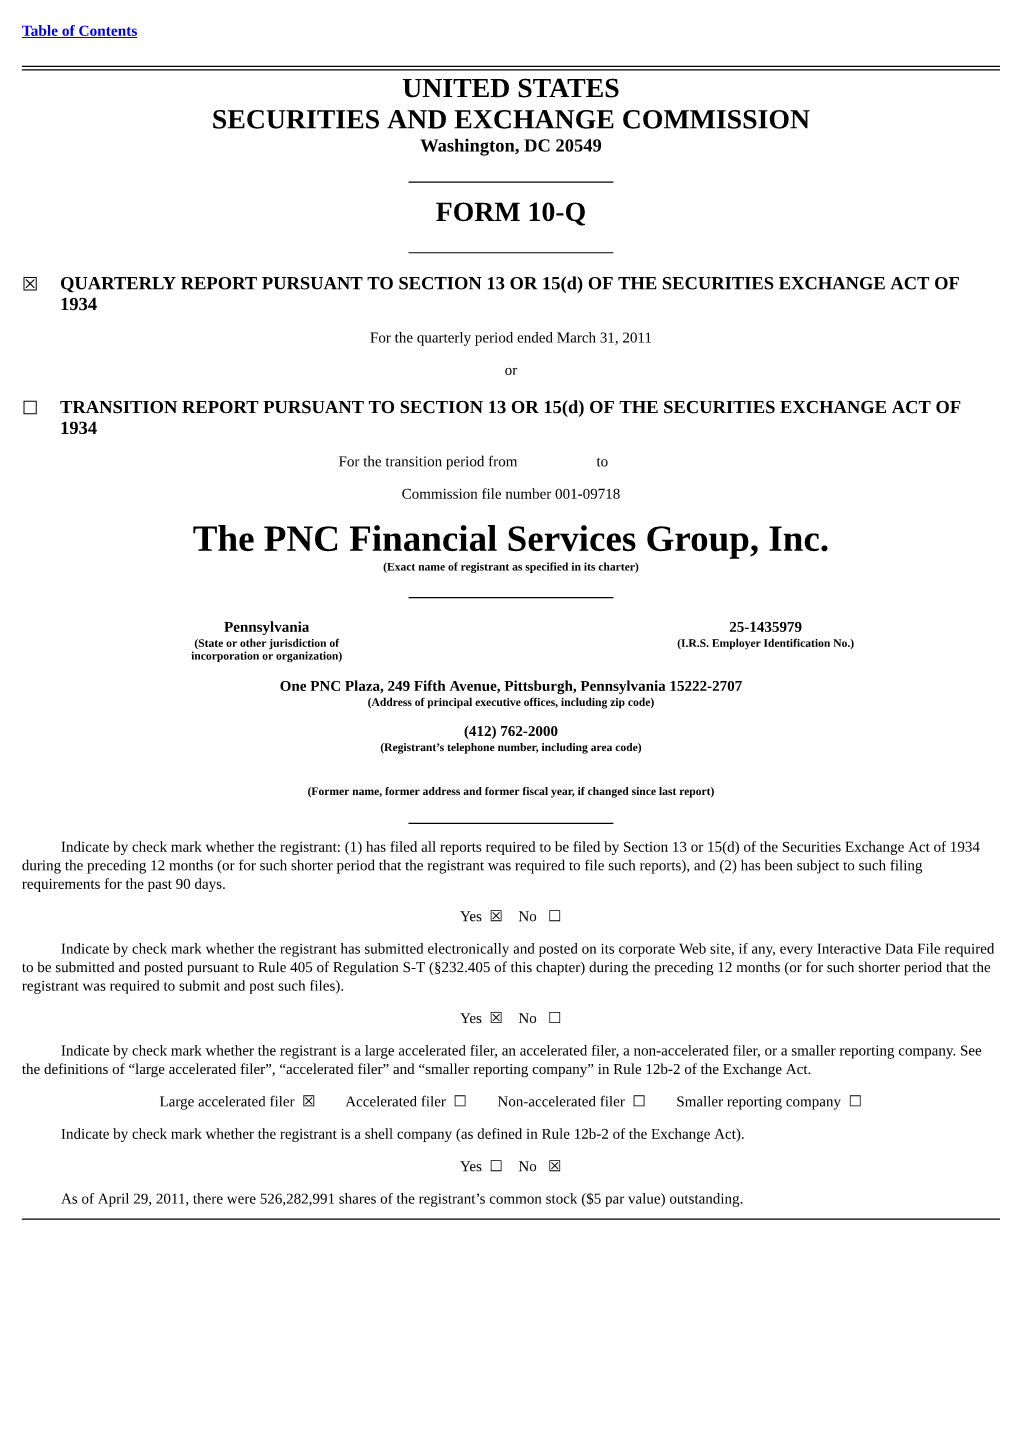 The PNC Financial Services Group, Inc. (Exact Name of Registrant As Specified in Its Charter)